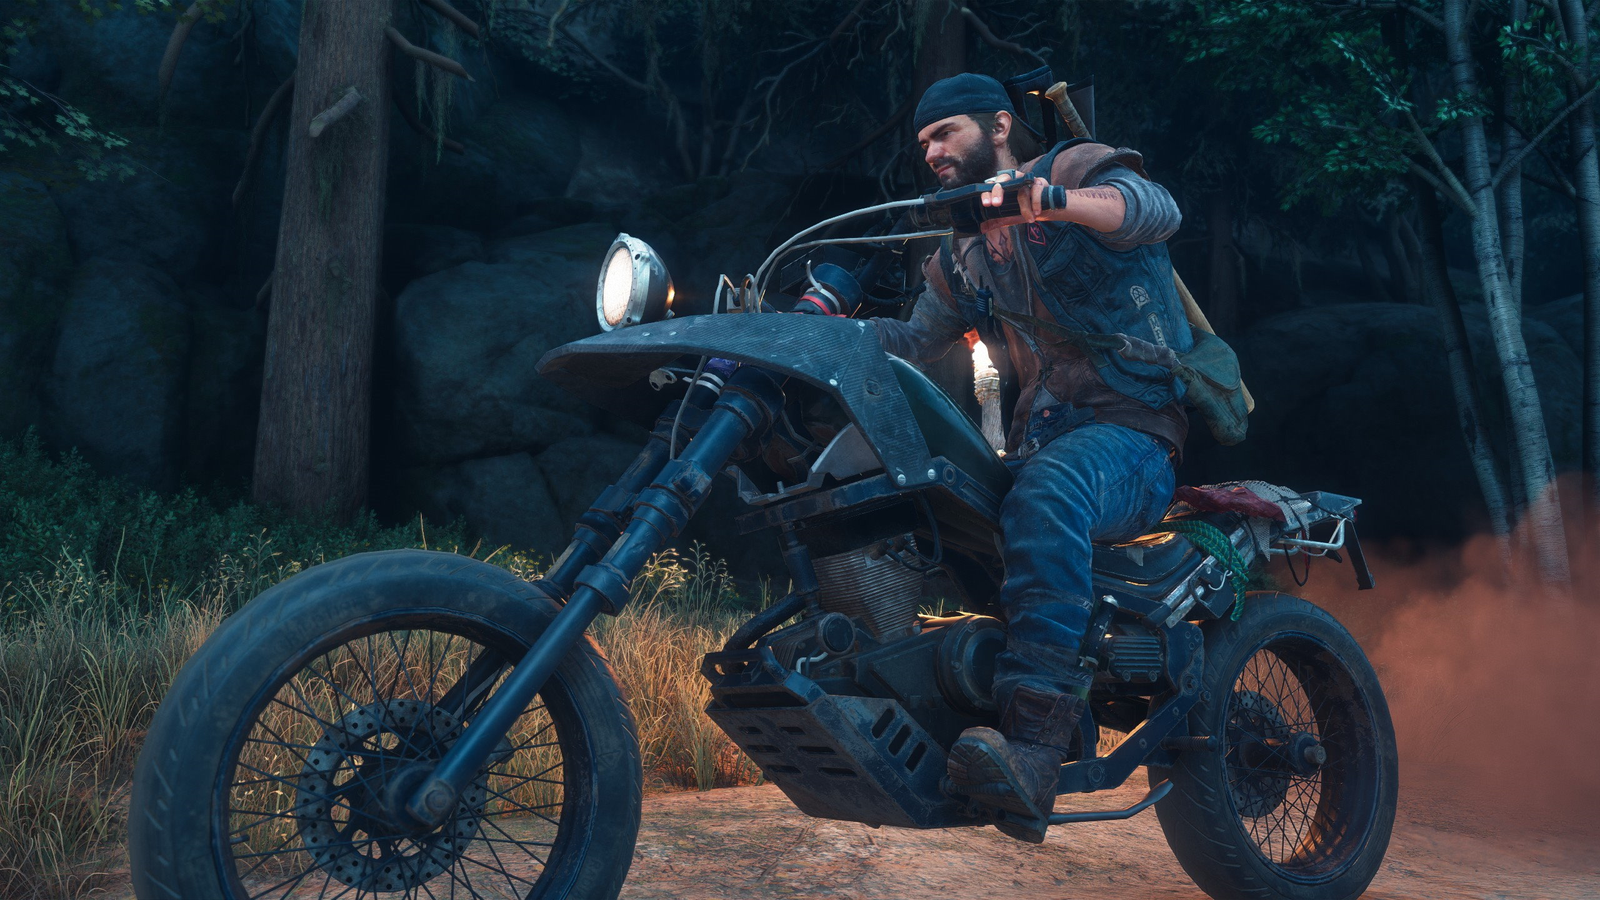 Days Gone for PC -- Is it worth it? Or should you wait to play it?